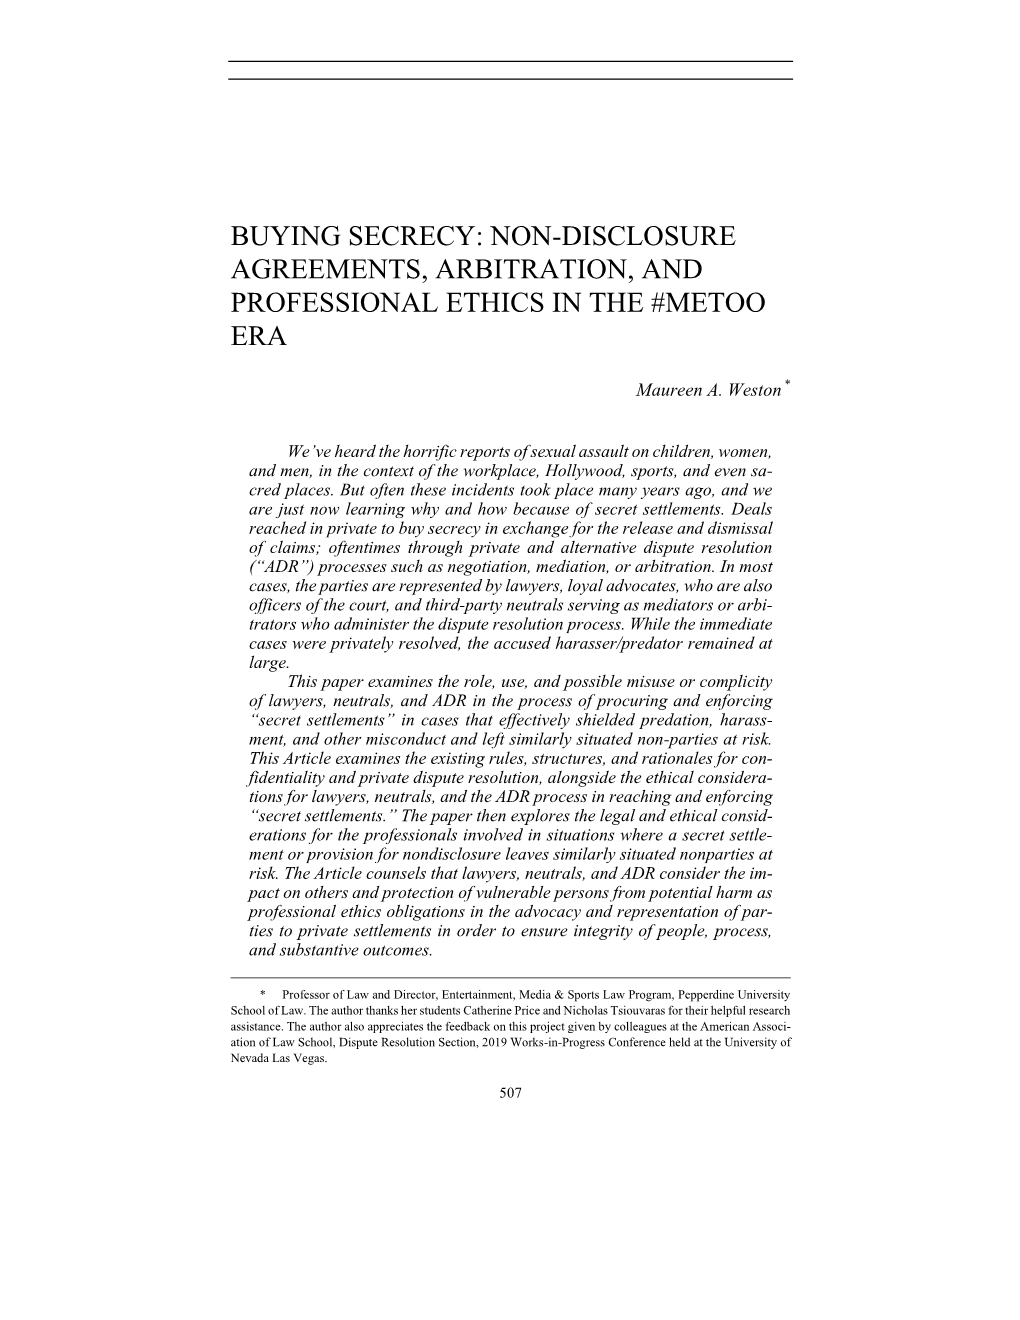 Buying Secrecy: Non-Disclosure Agreements, Arbitration, and Professional Ethics in the #Metoo Era